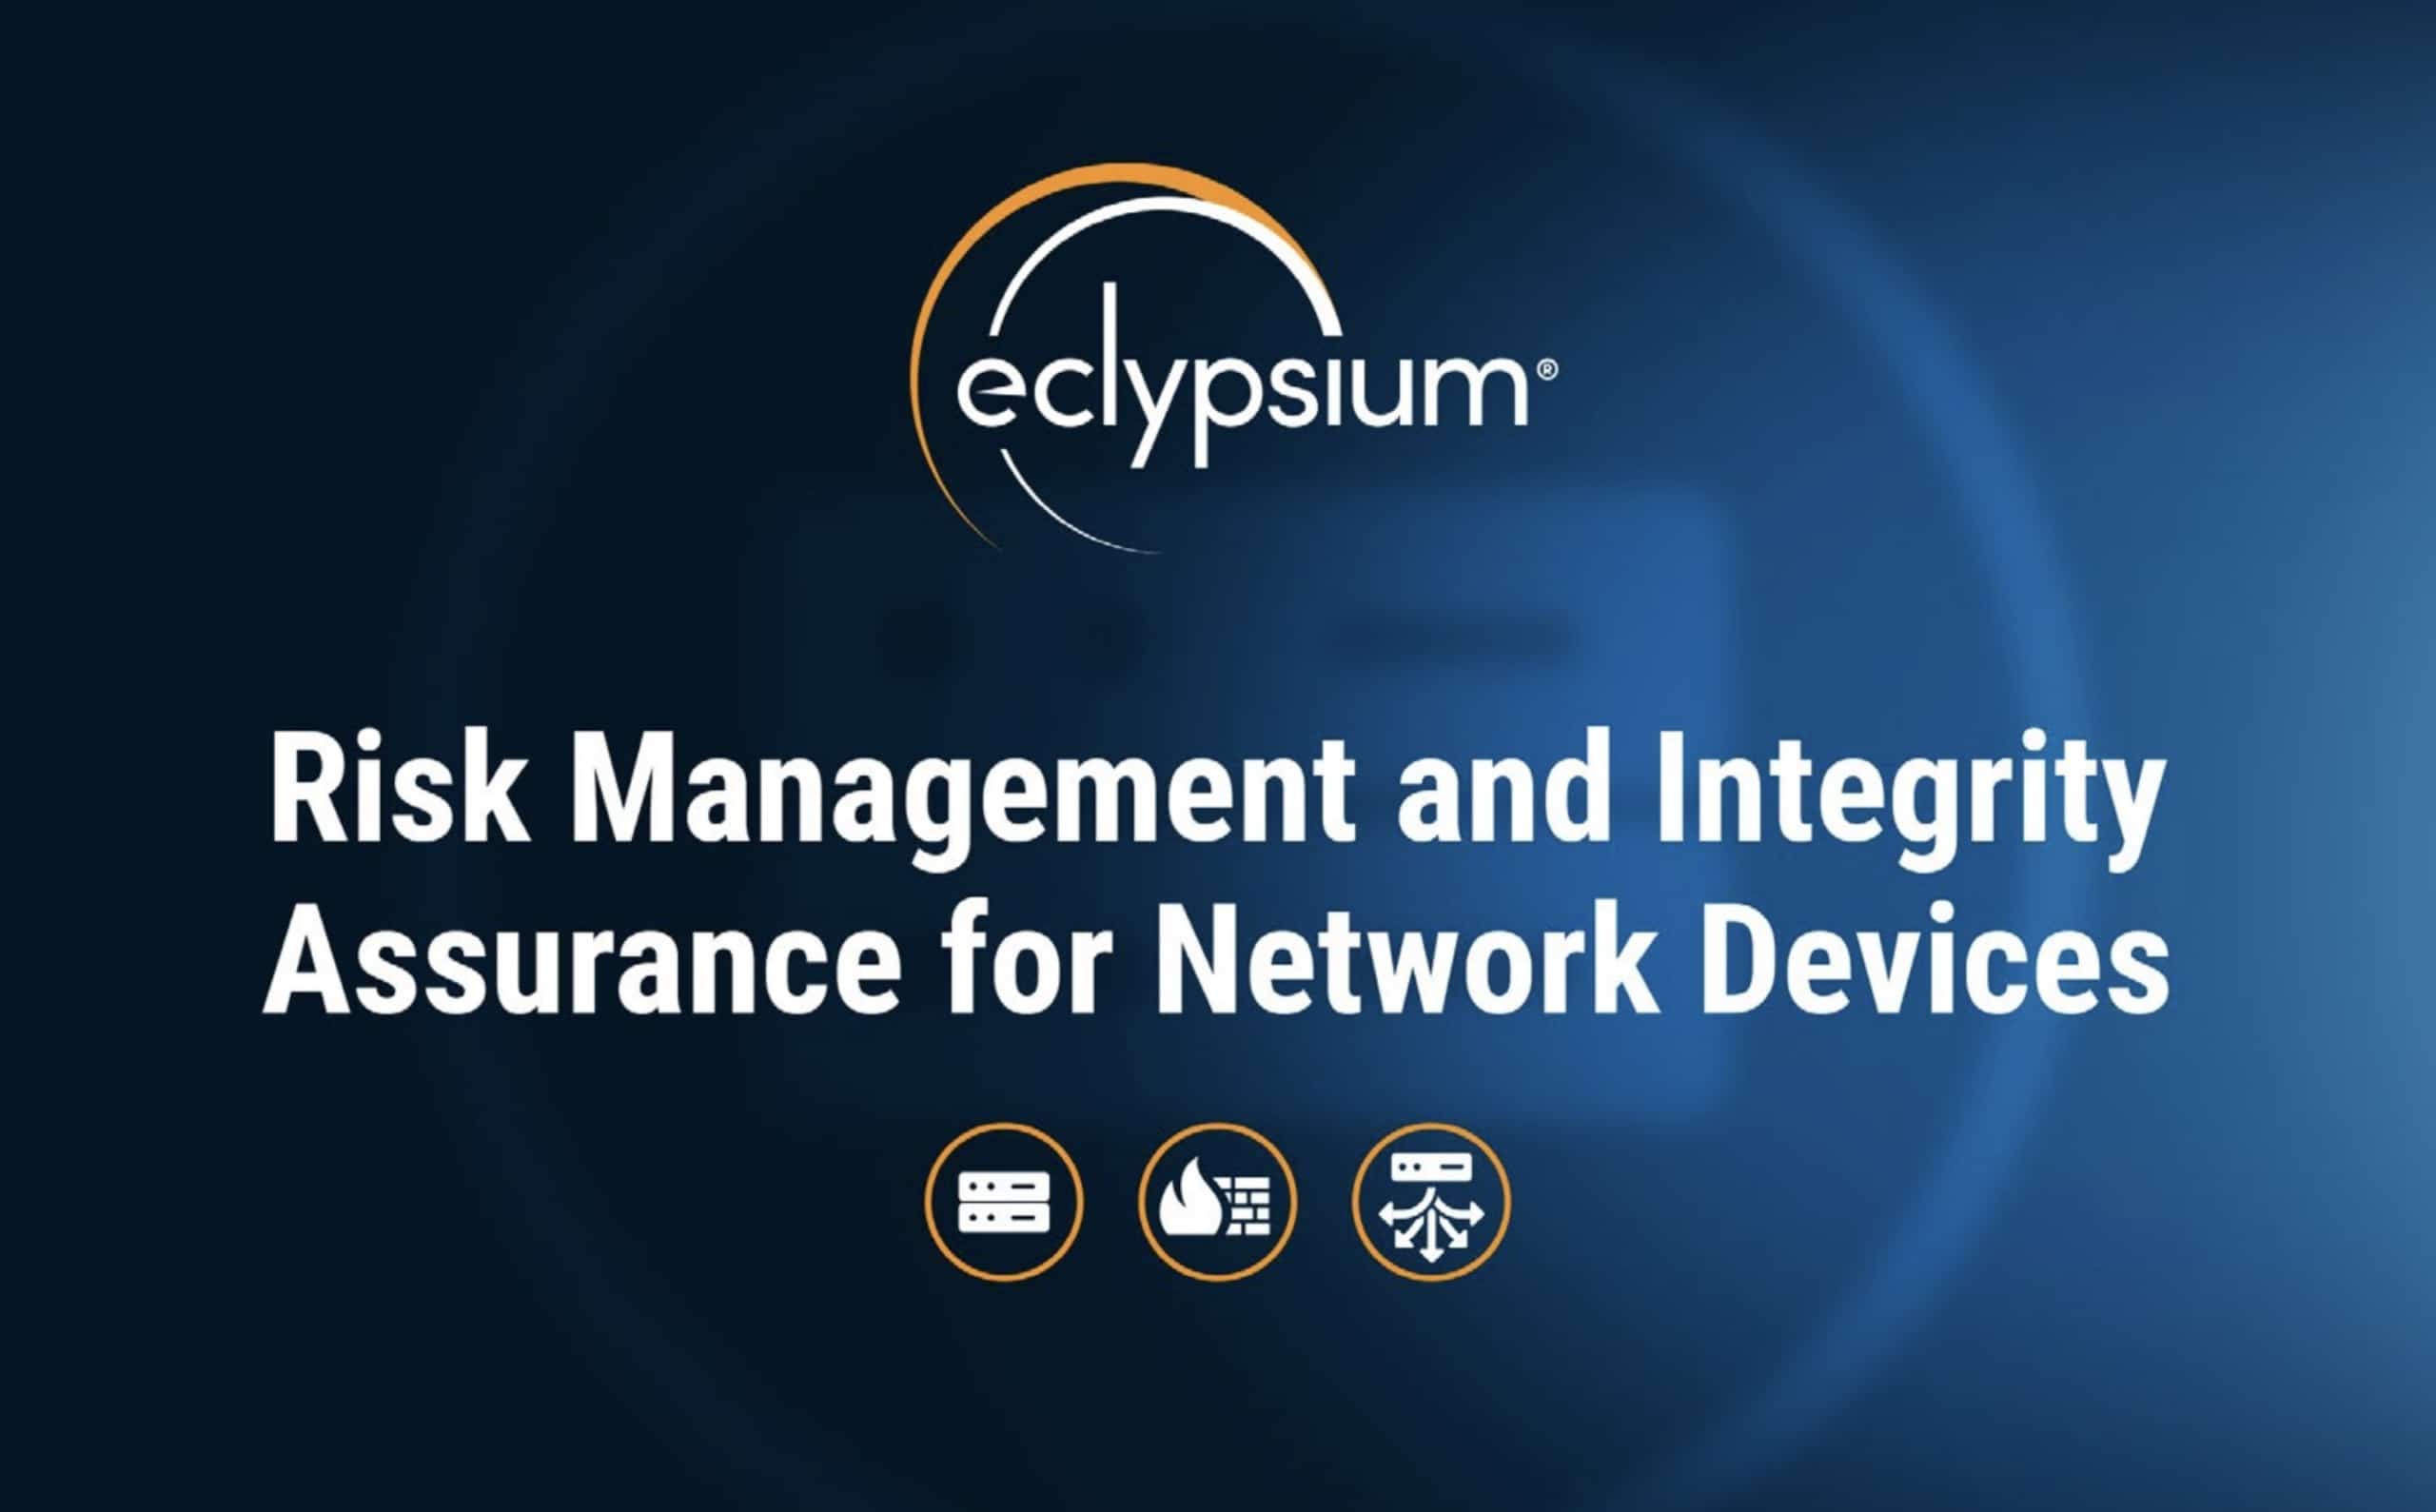 Eclypsium Risk Management and Integrity Assurance for Network Devices